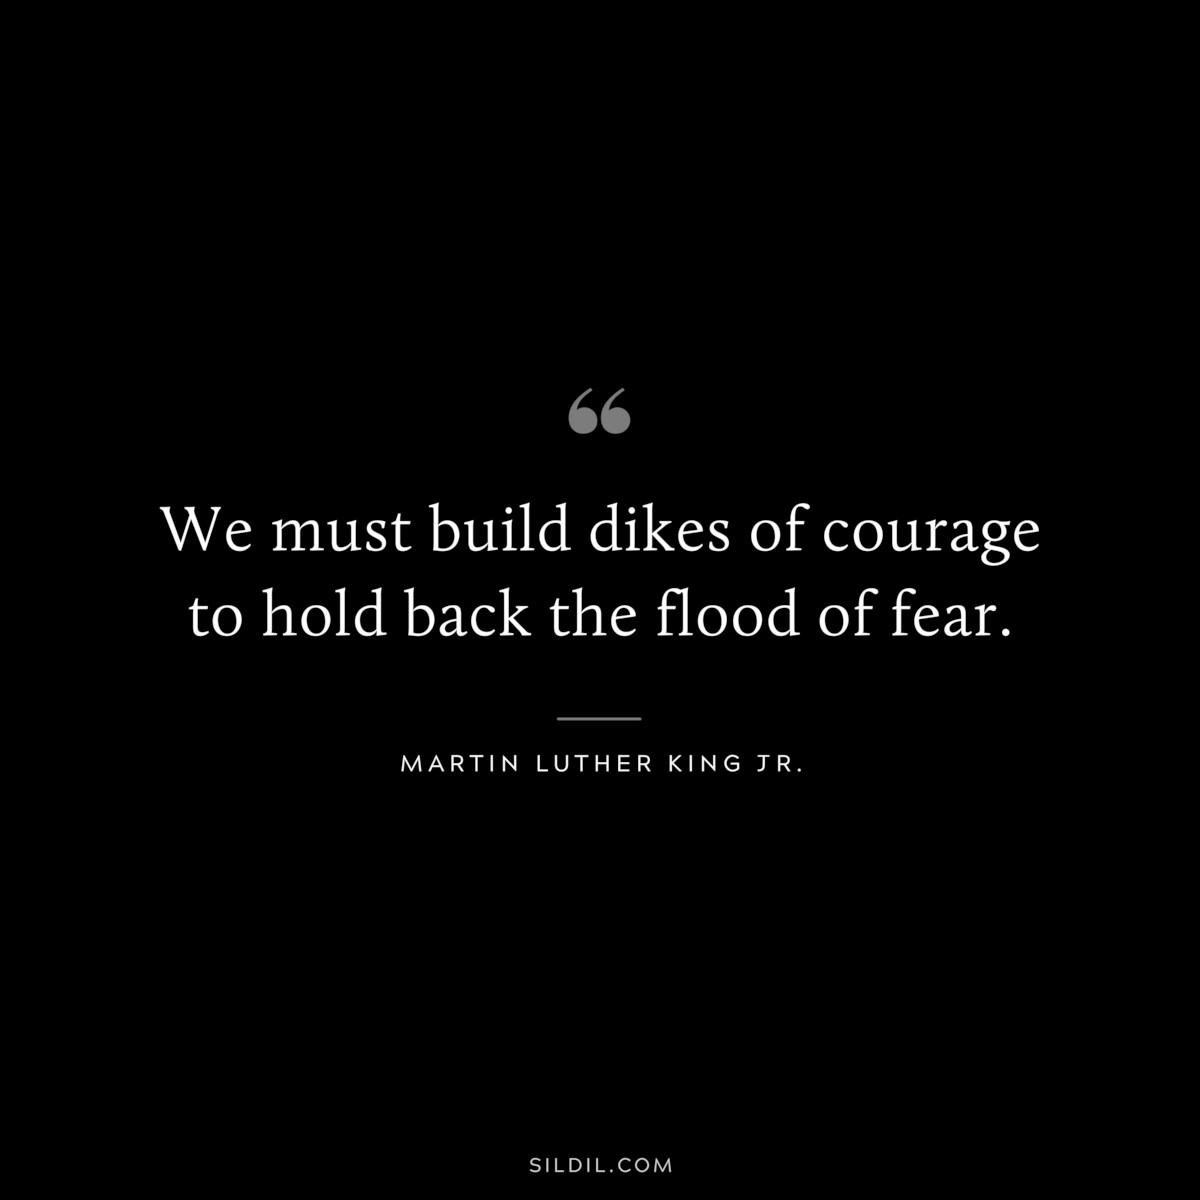 We must build dikes of courage to hold back the flood of fear. ― Martin Luther King Jr.